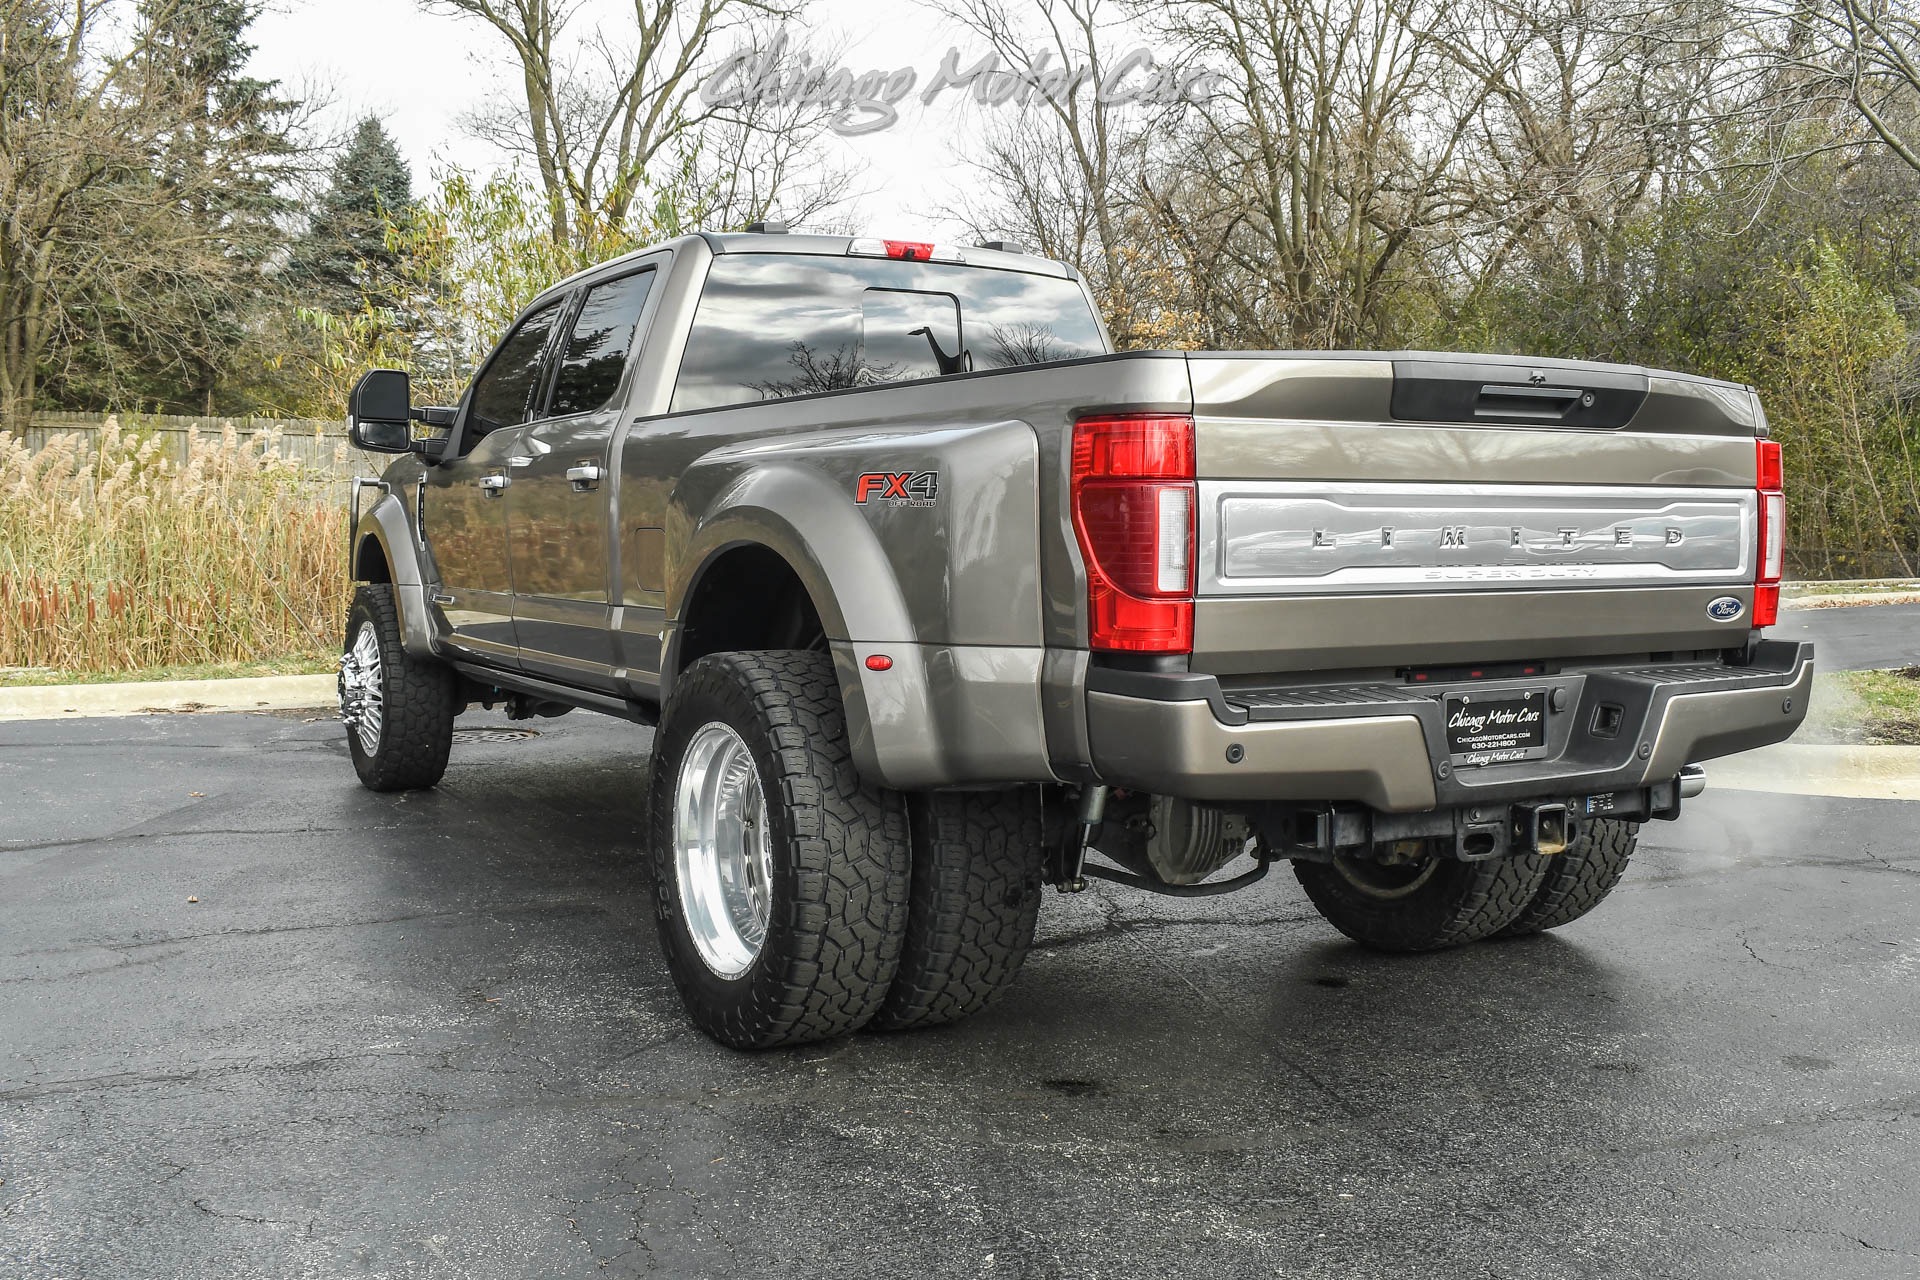 Used-2021-Ford-F450-Super-Duty-Limited-4x4-Crew-Cab-Pick-Up-67L-Power-Stroke-V8-FX4-Pkg-Lifted